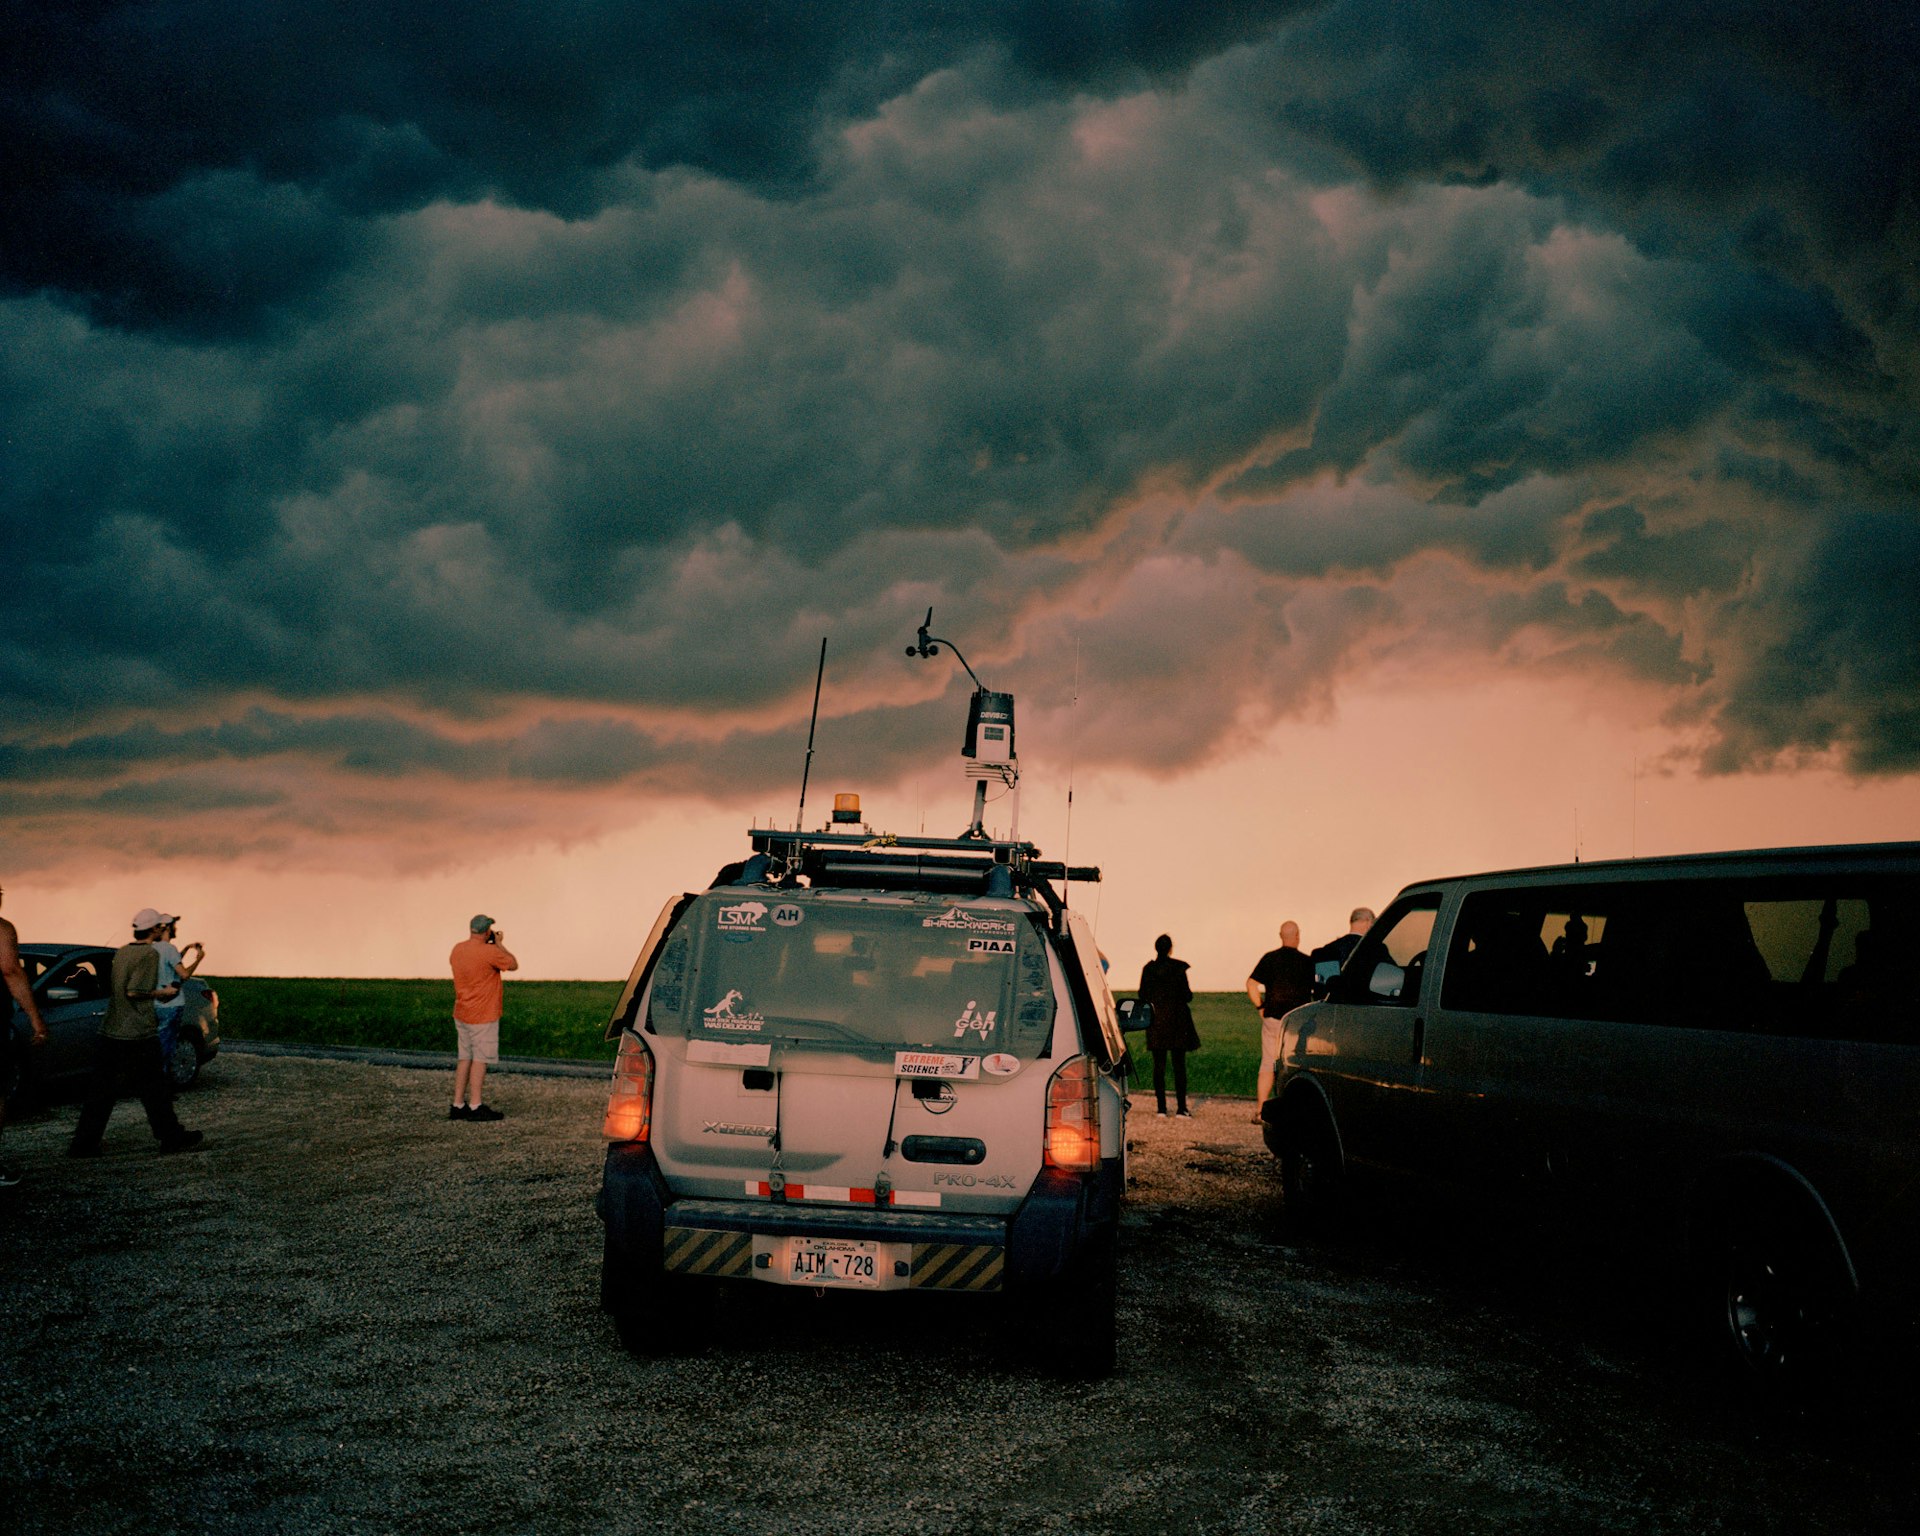 Hunting tornados in the American Midwest